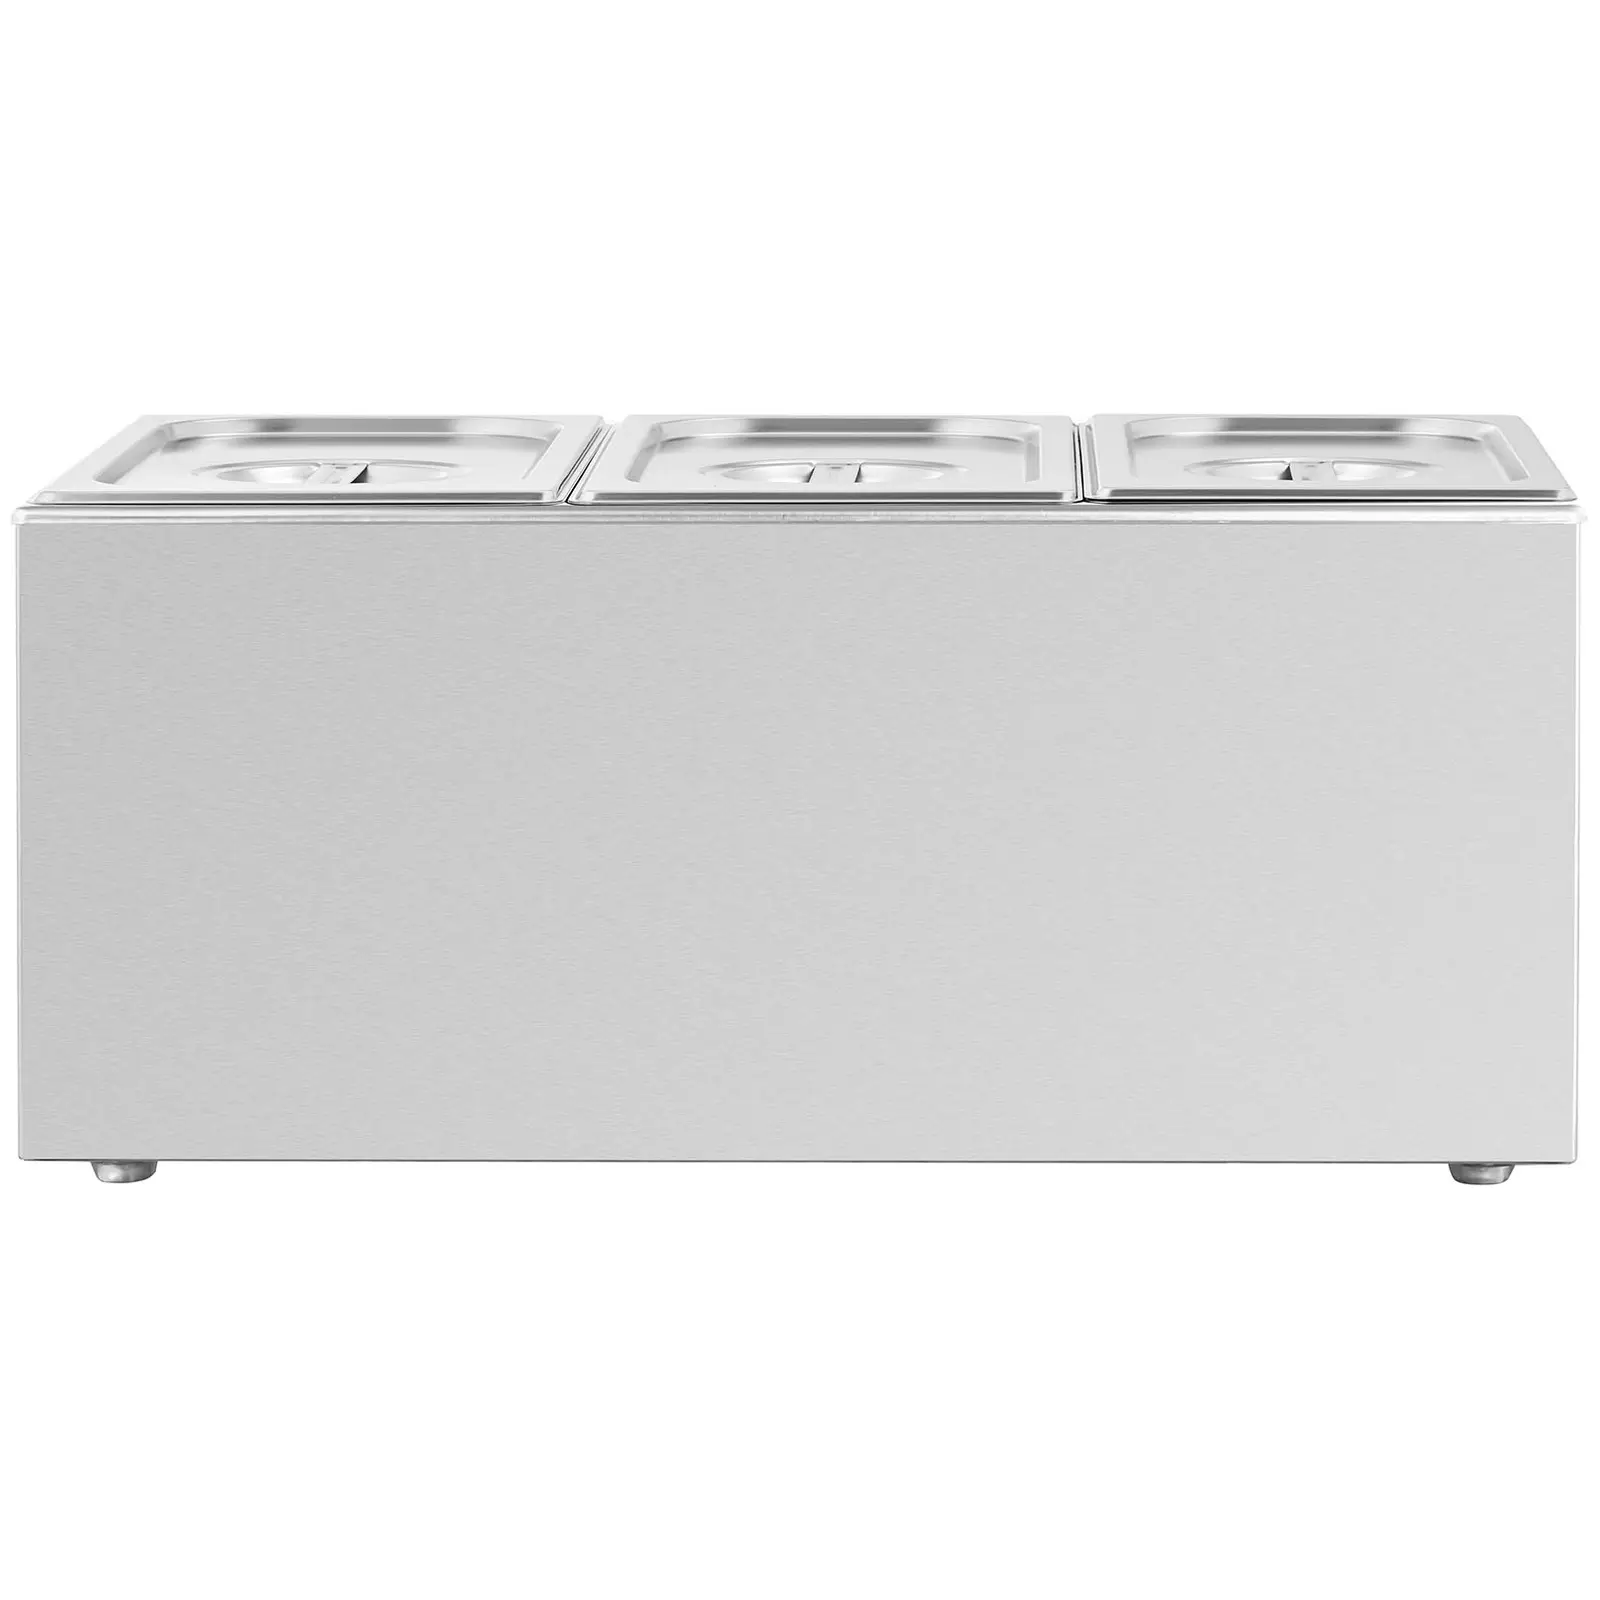 Bemar - 640 W - 3 x GN GN 1/3 - Royal Catering